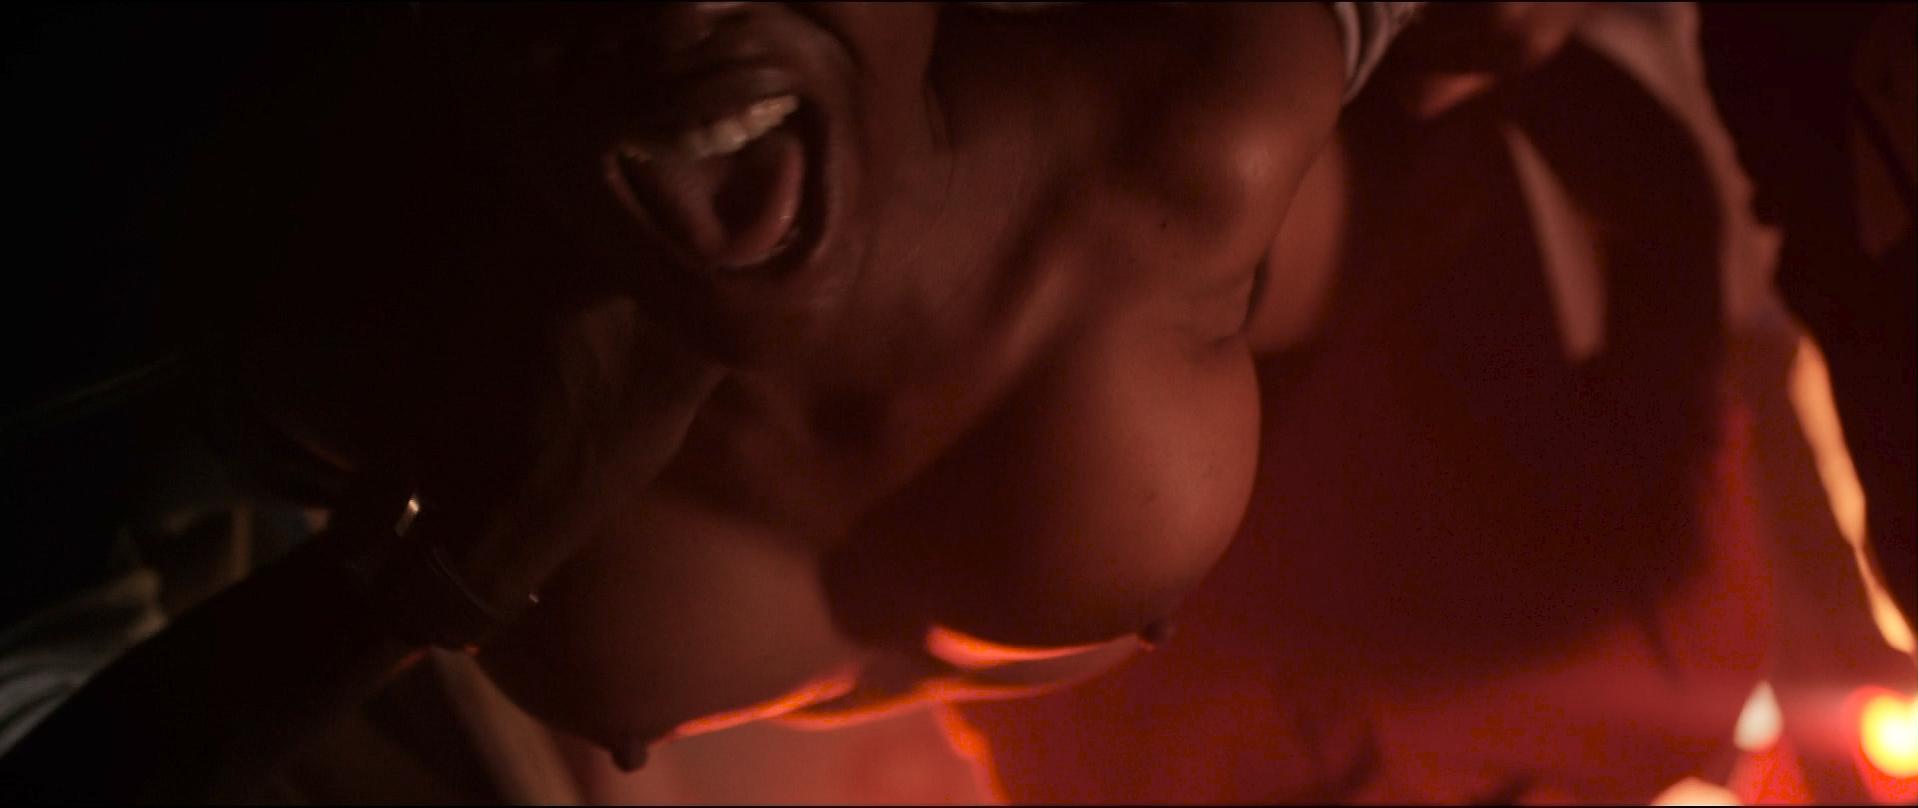 Black Frontal Nude Scene From Movies